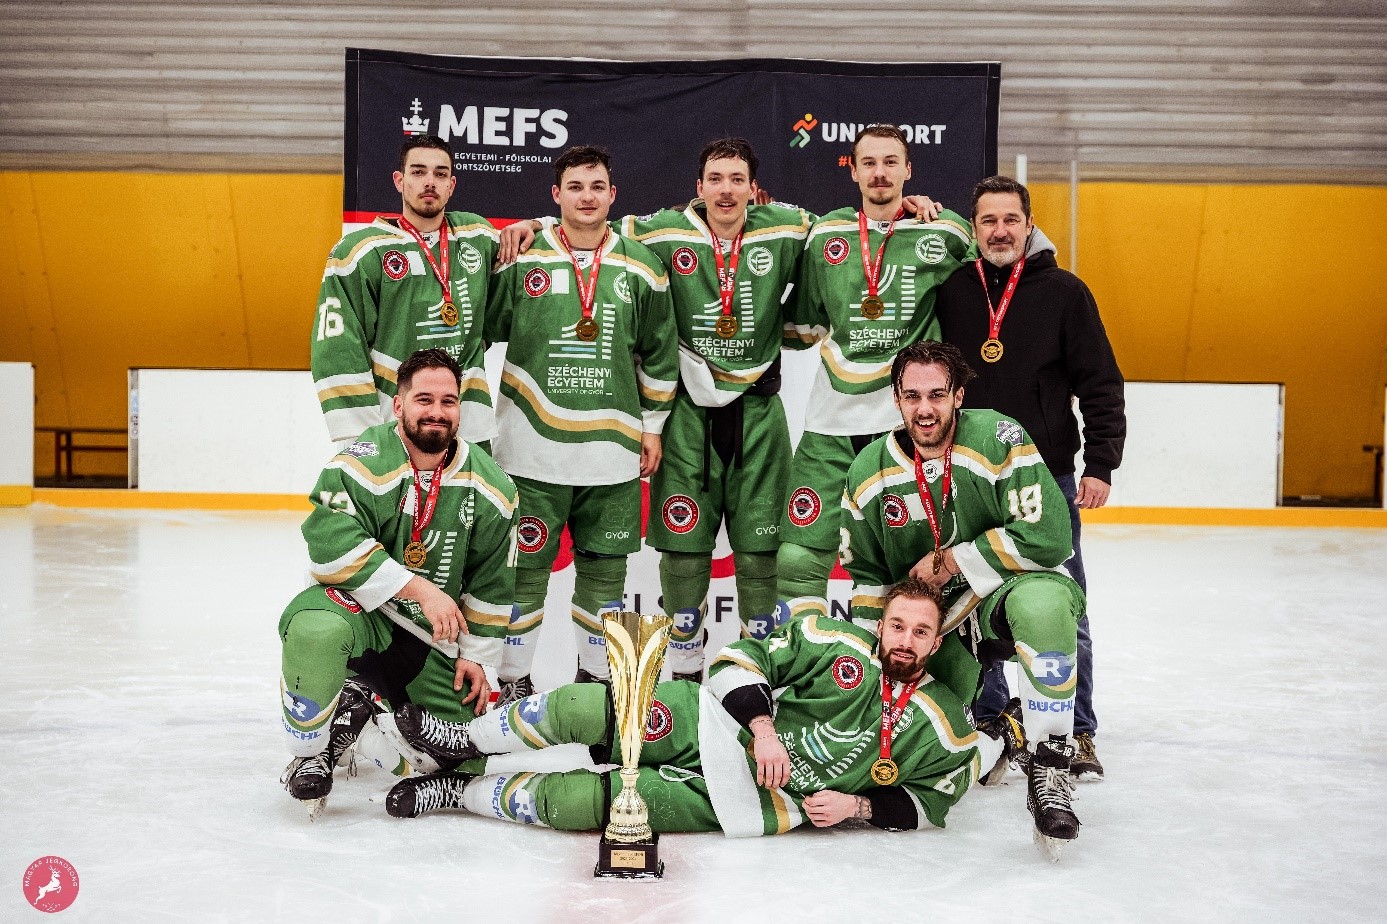 The team of SZE has the Hungarian University-College National Ice Hockey Championship